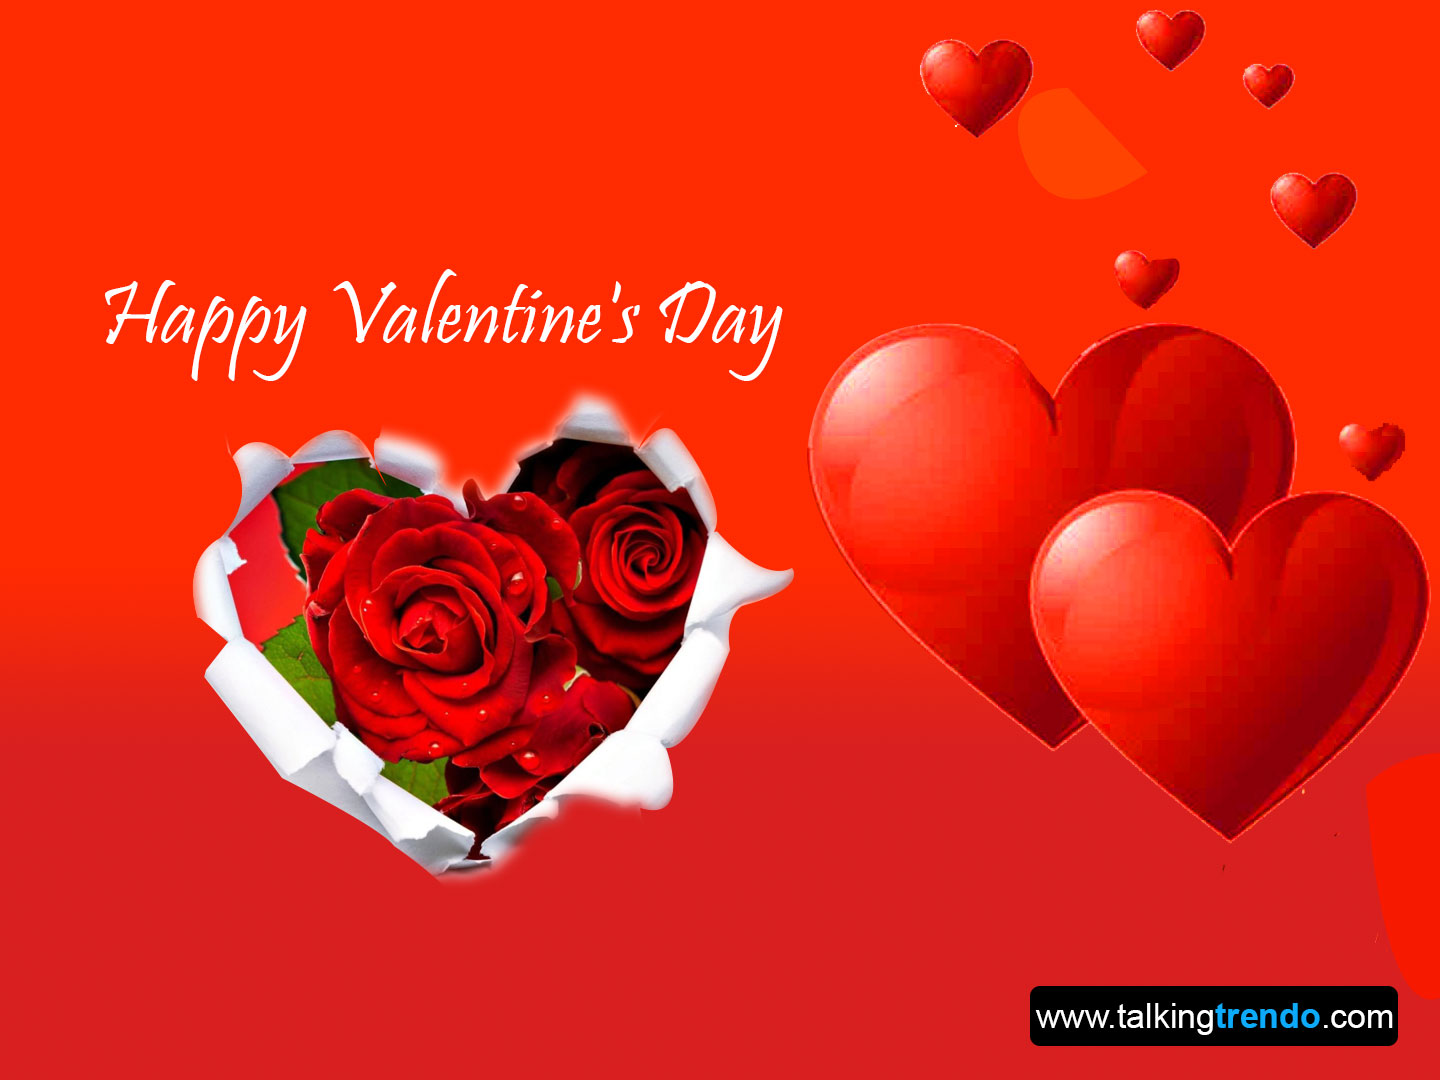 Happy Valentines Day Image Wallpaper Wishes